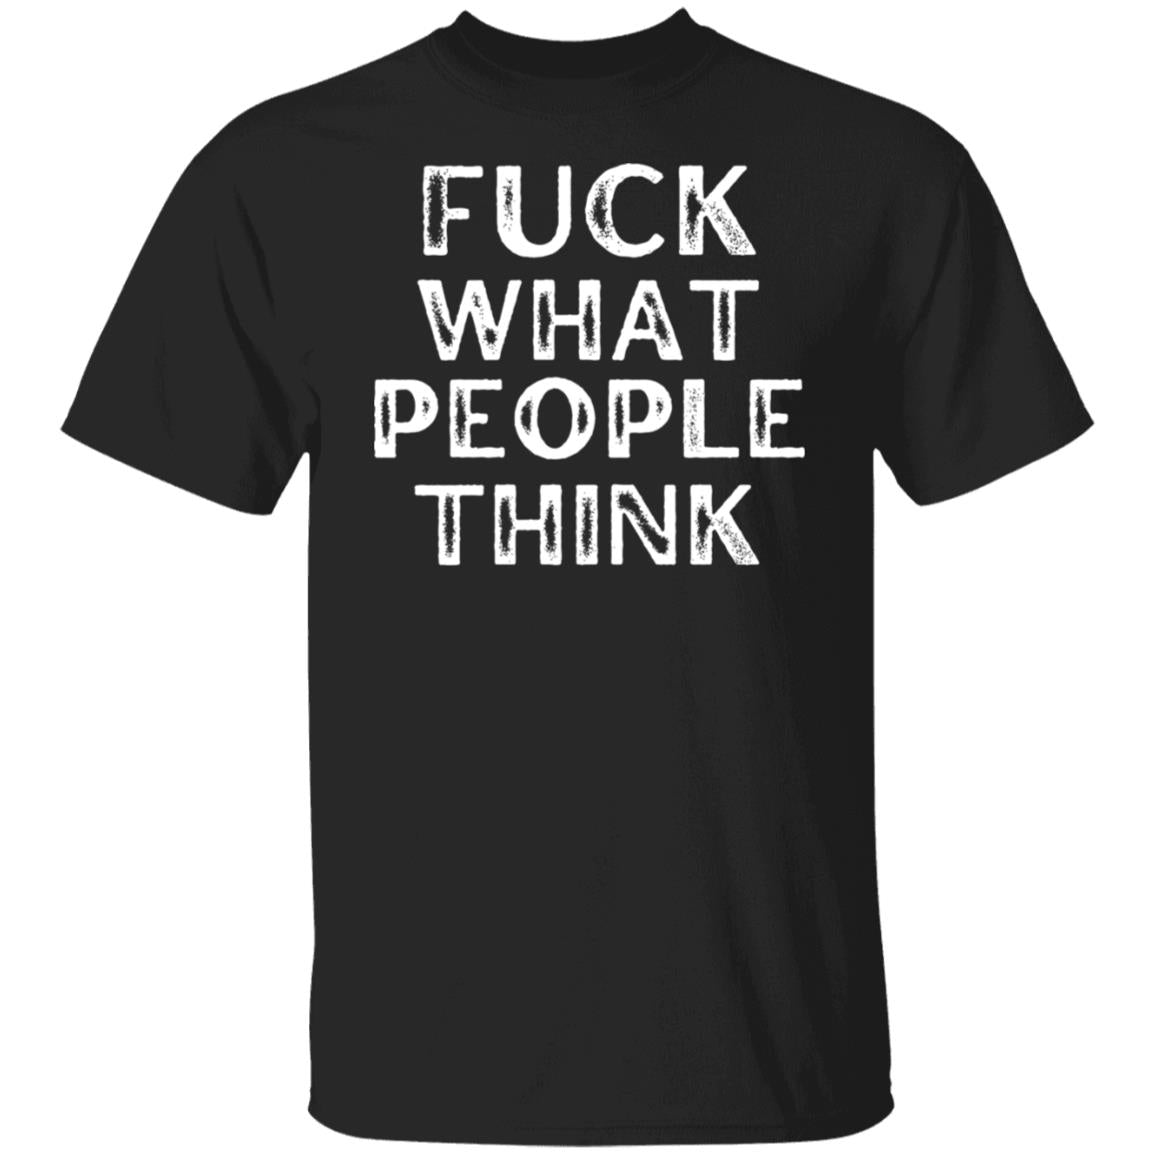 F#CK What People Think Free Spirit Open Minded Free Thinker Shirt T-Shirt